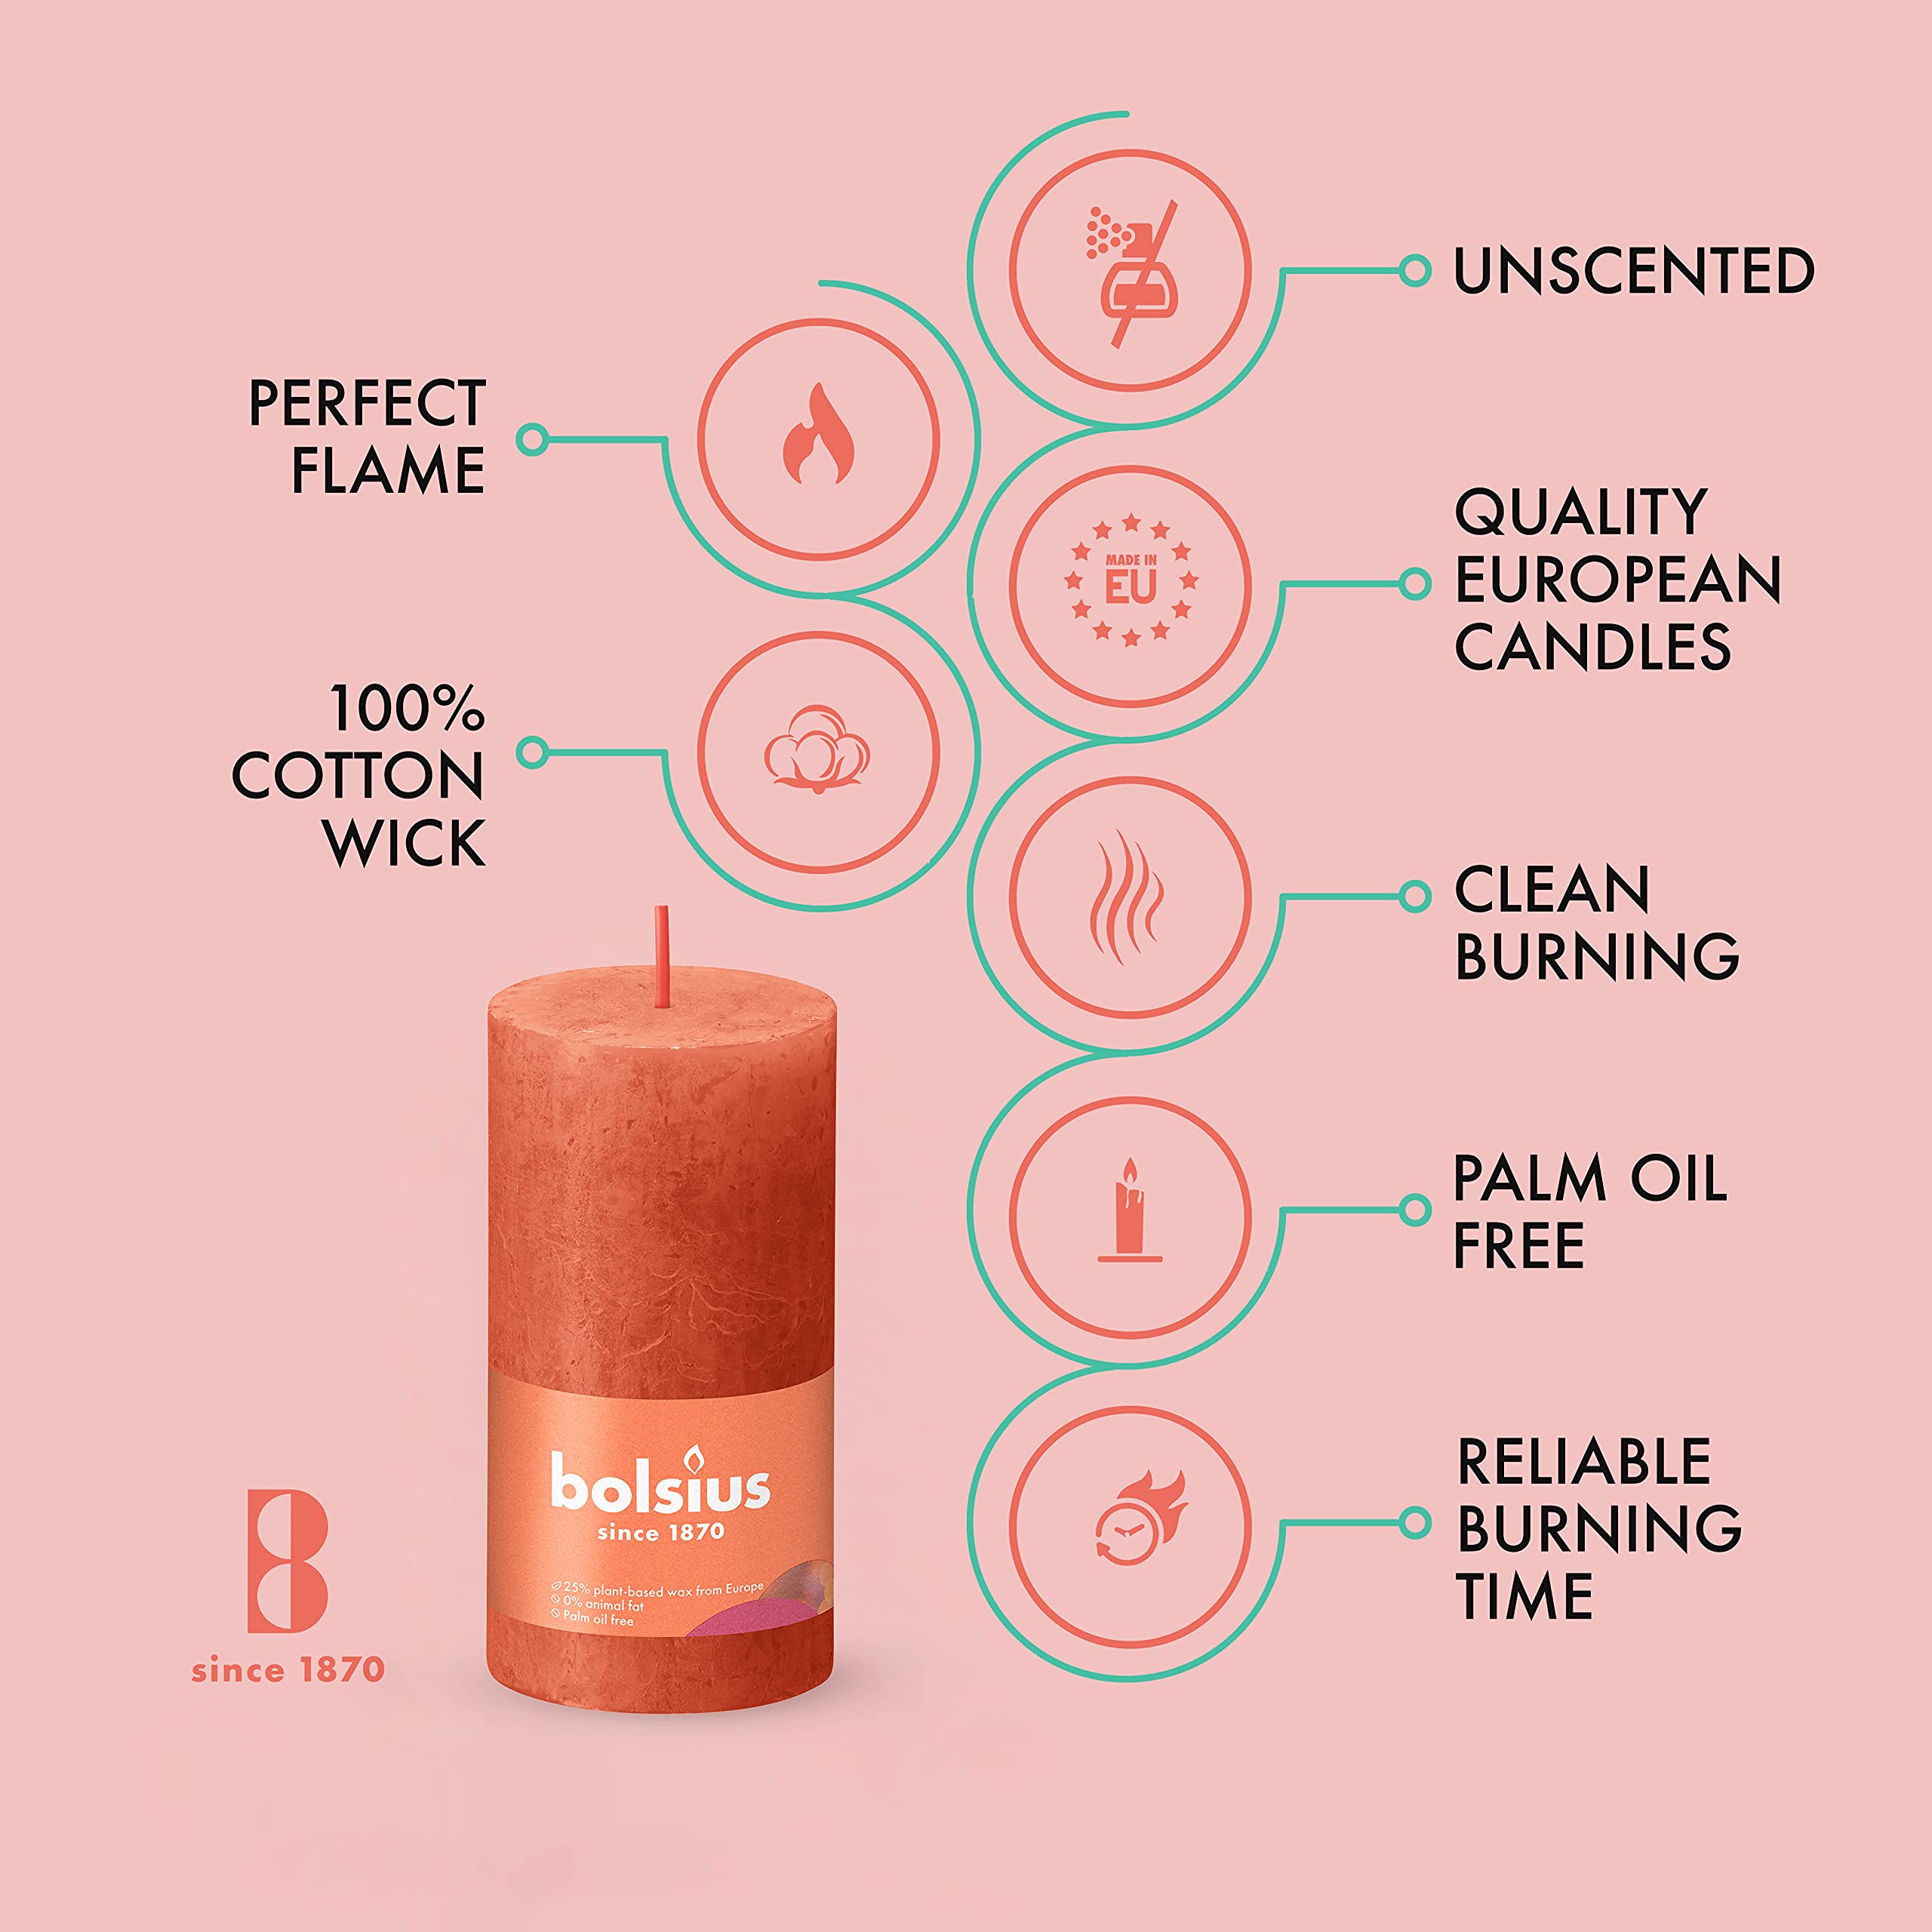 BOLSIUS 4 Pack Orange Rustic Pillar Candles - 2 X 4 Inches - Premium European Quality - Includes Natural Plant-Based Wax - Unscented Dripless Smokeless 30 Hour Party D�cor and Wedding Candles  - Like New